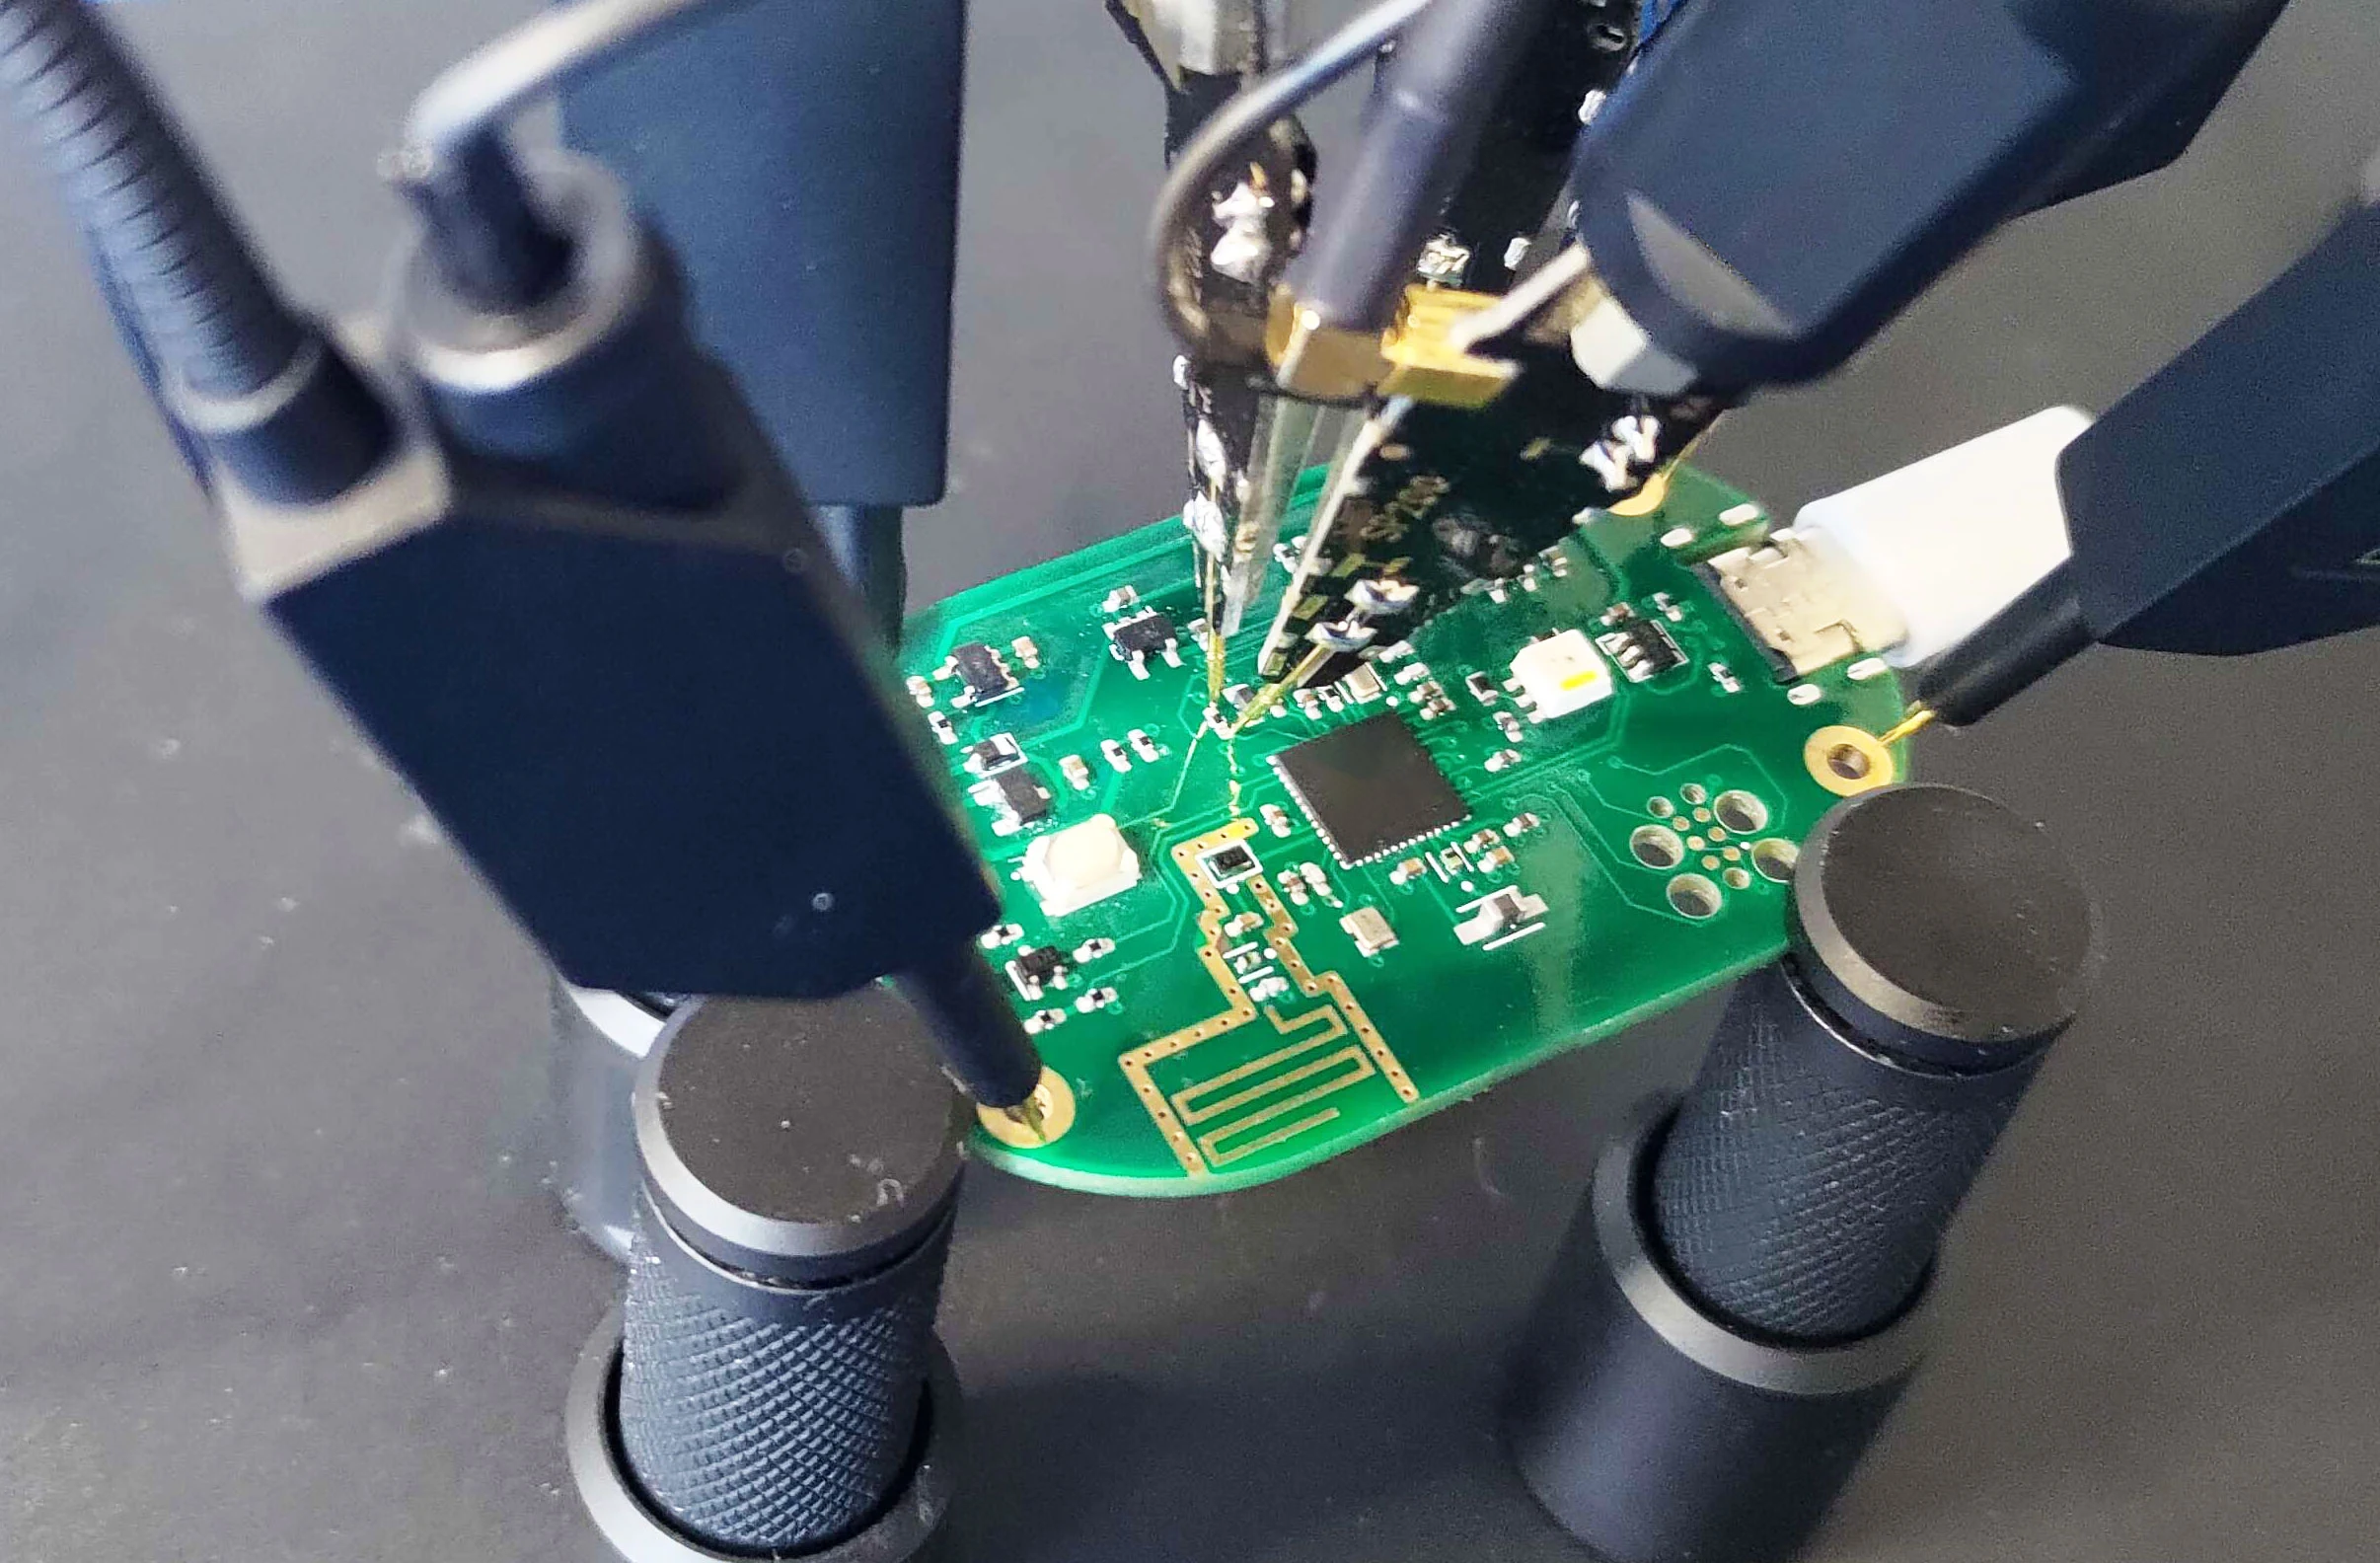 Locknest's electronic card under the microscope